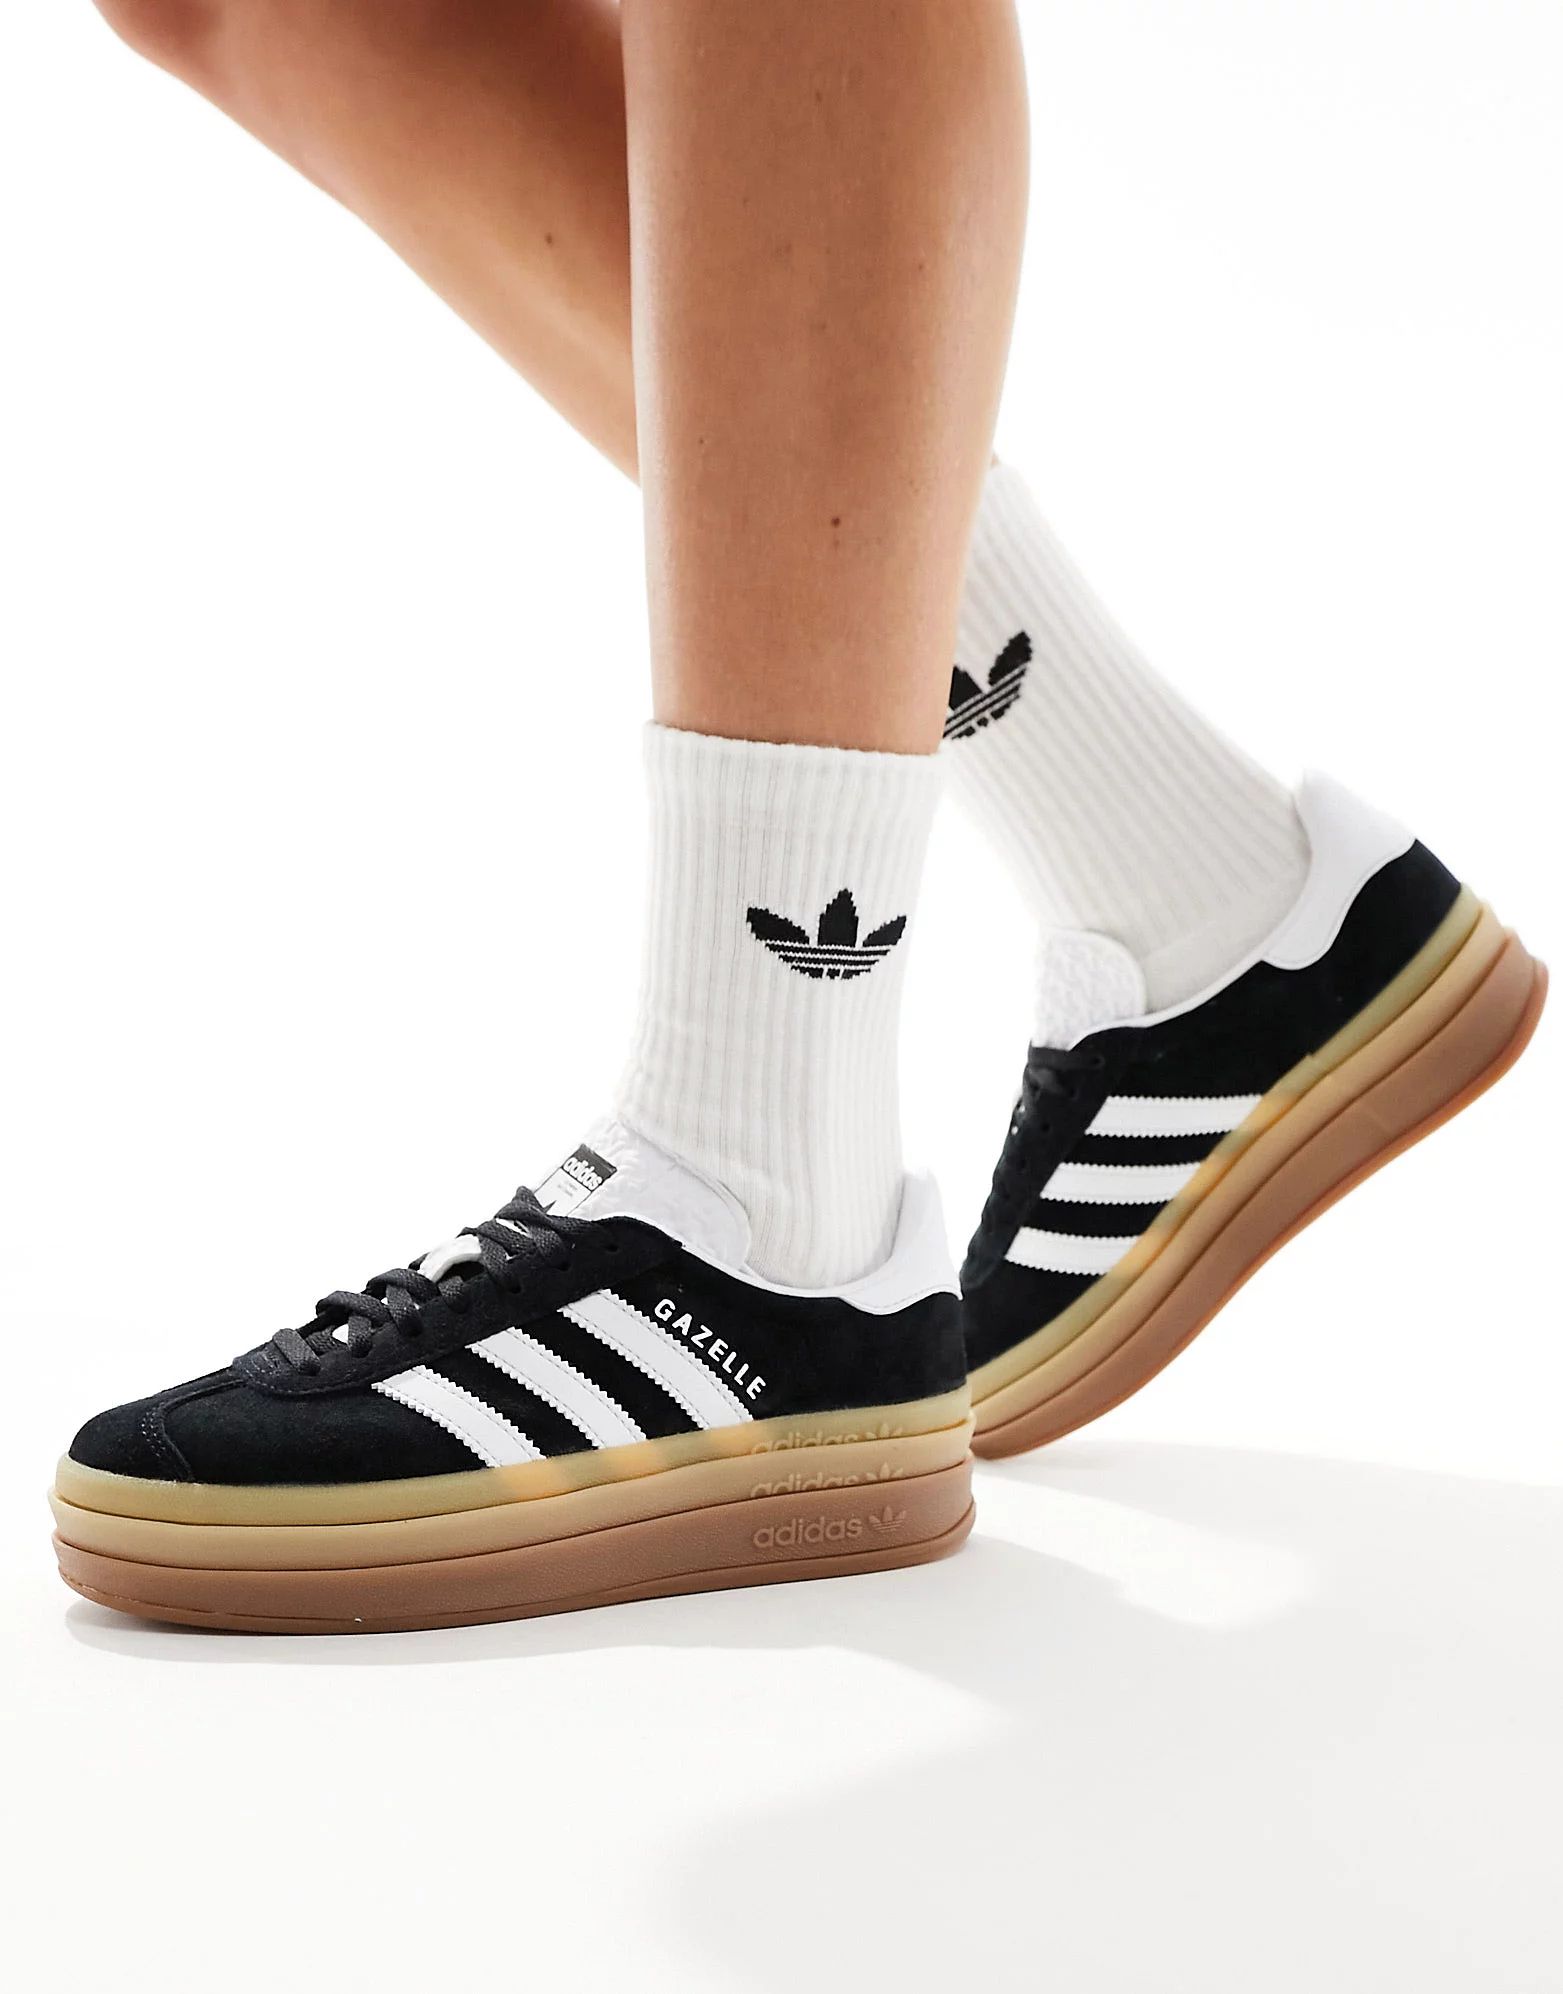 adidas Originals Gazelle Bold trainers in black and white | ASOS (Global)